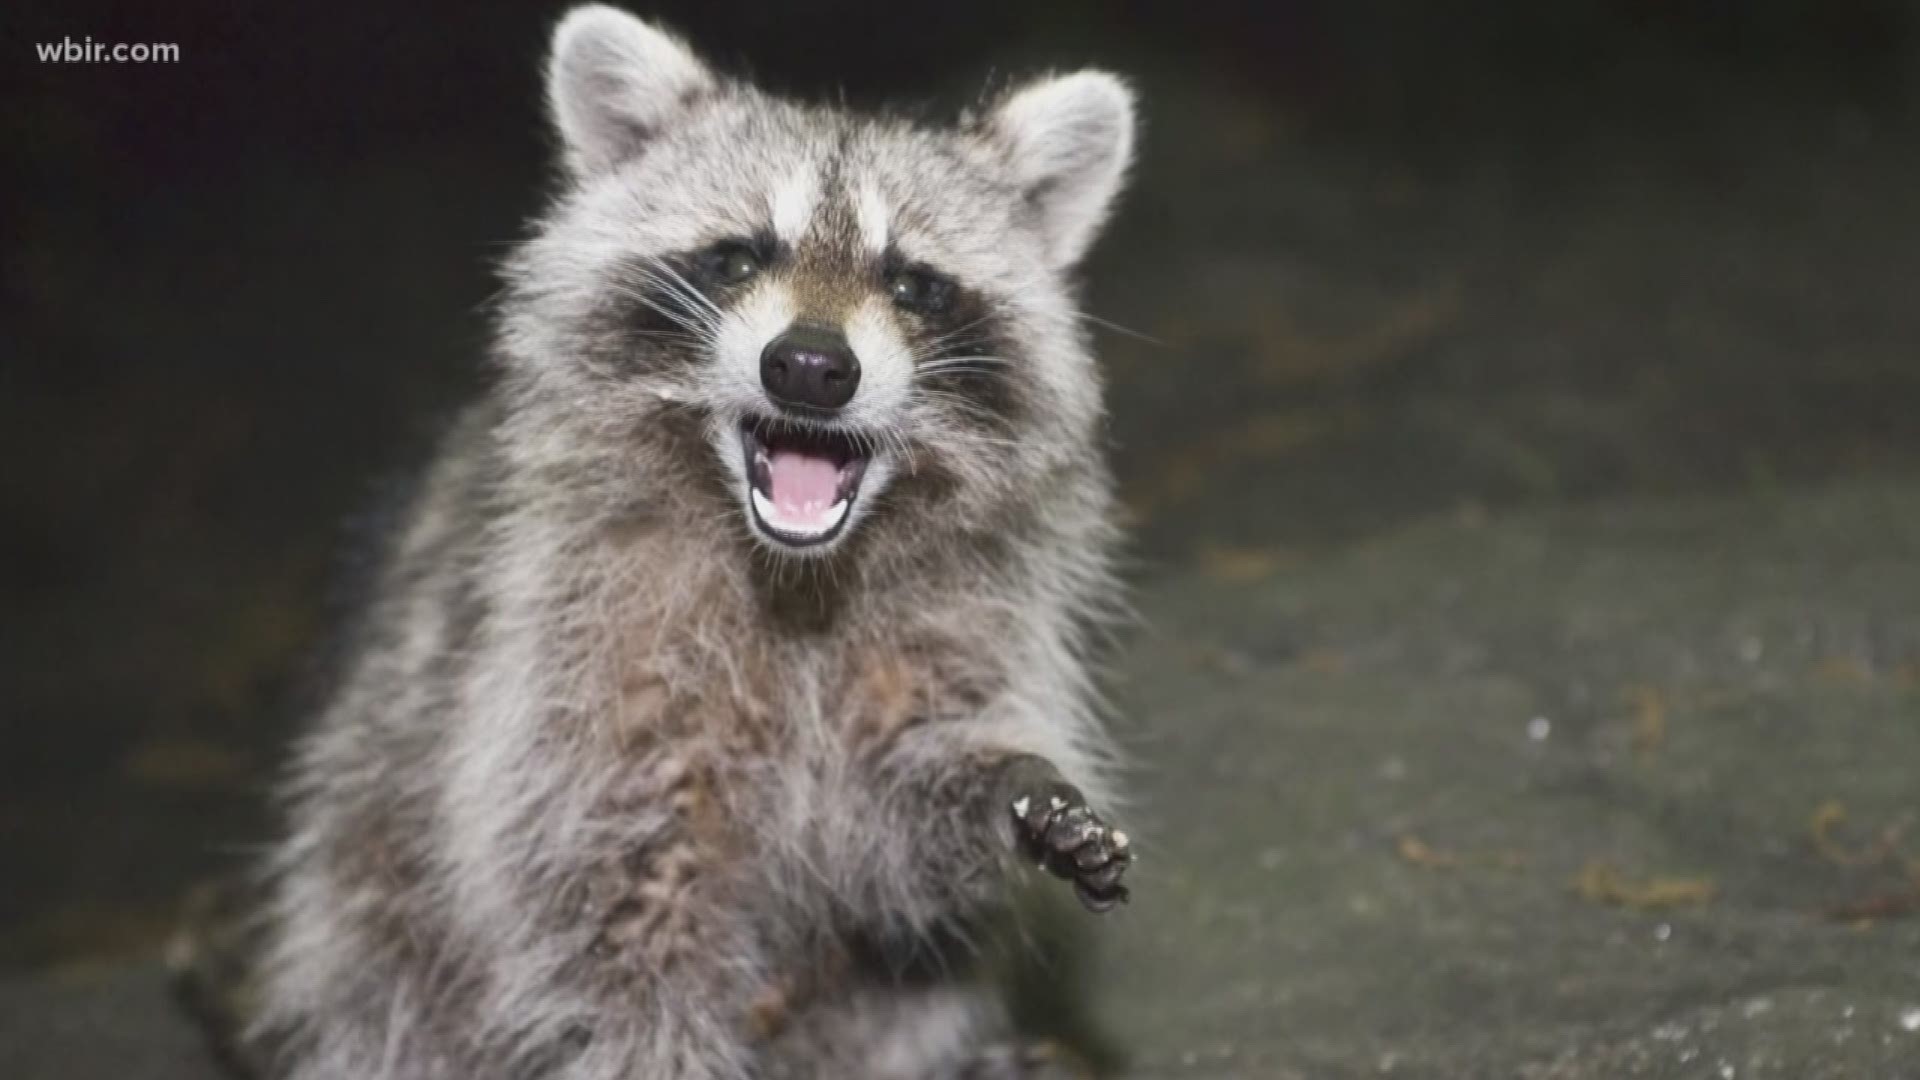 If you've seen more raccoons around your neighborhood recently -- you're not alone. The raccoon population in some parts of Knoxville is up to three times as large as usual.